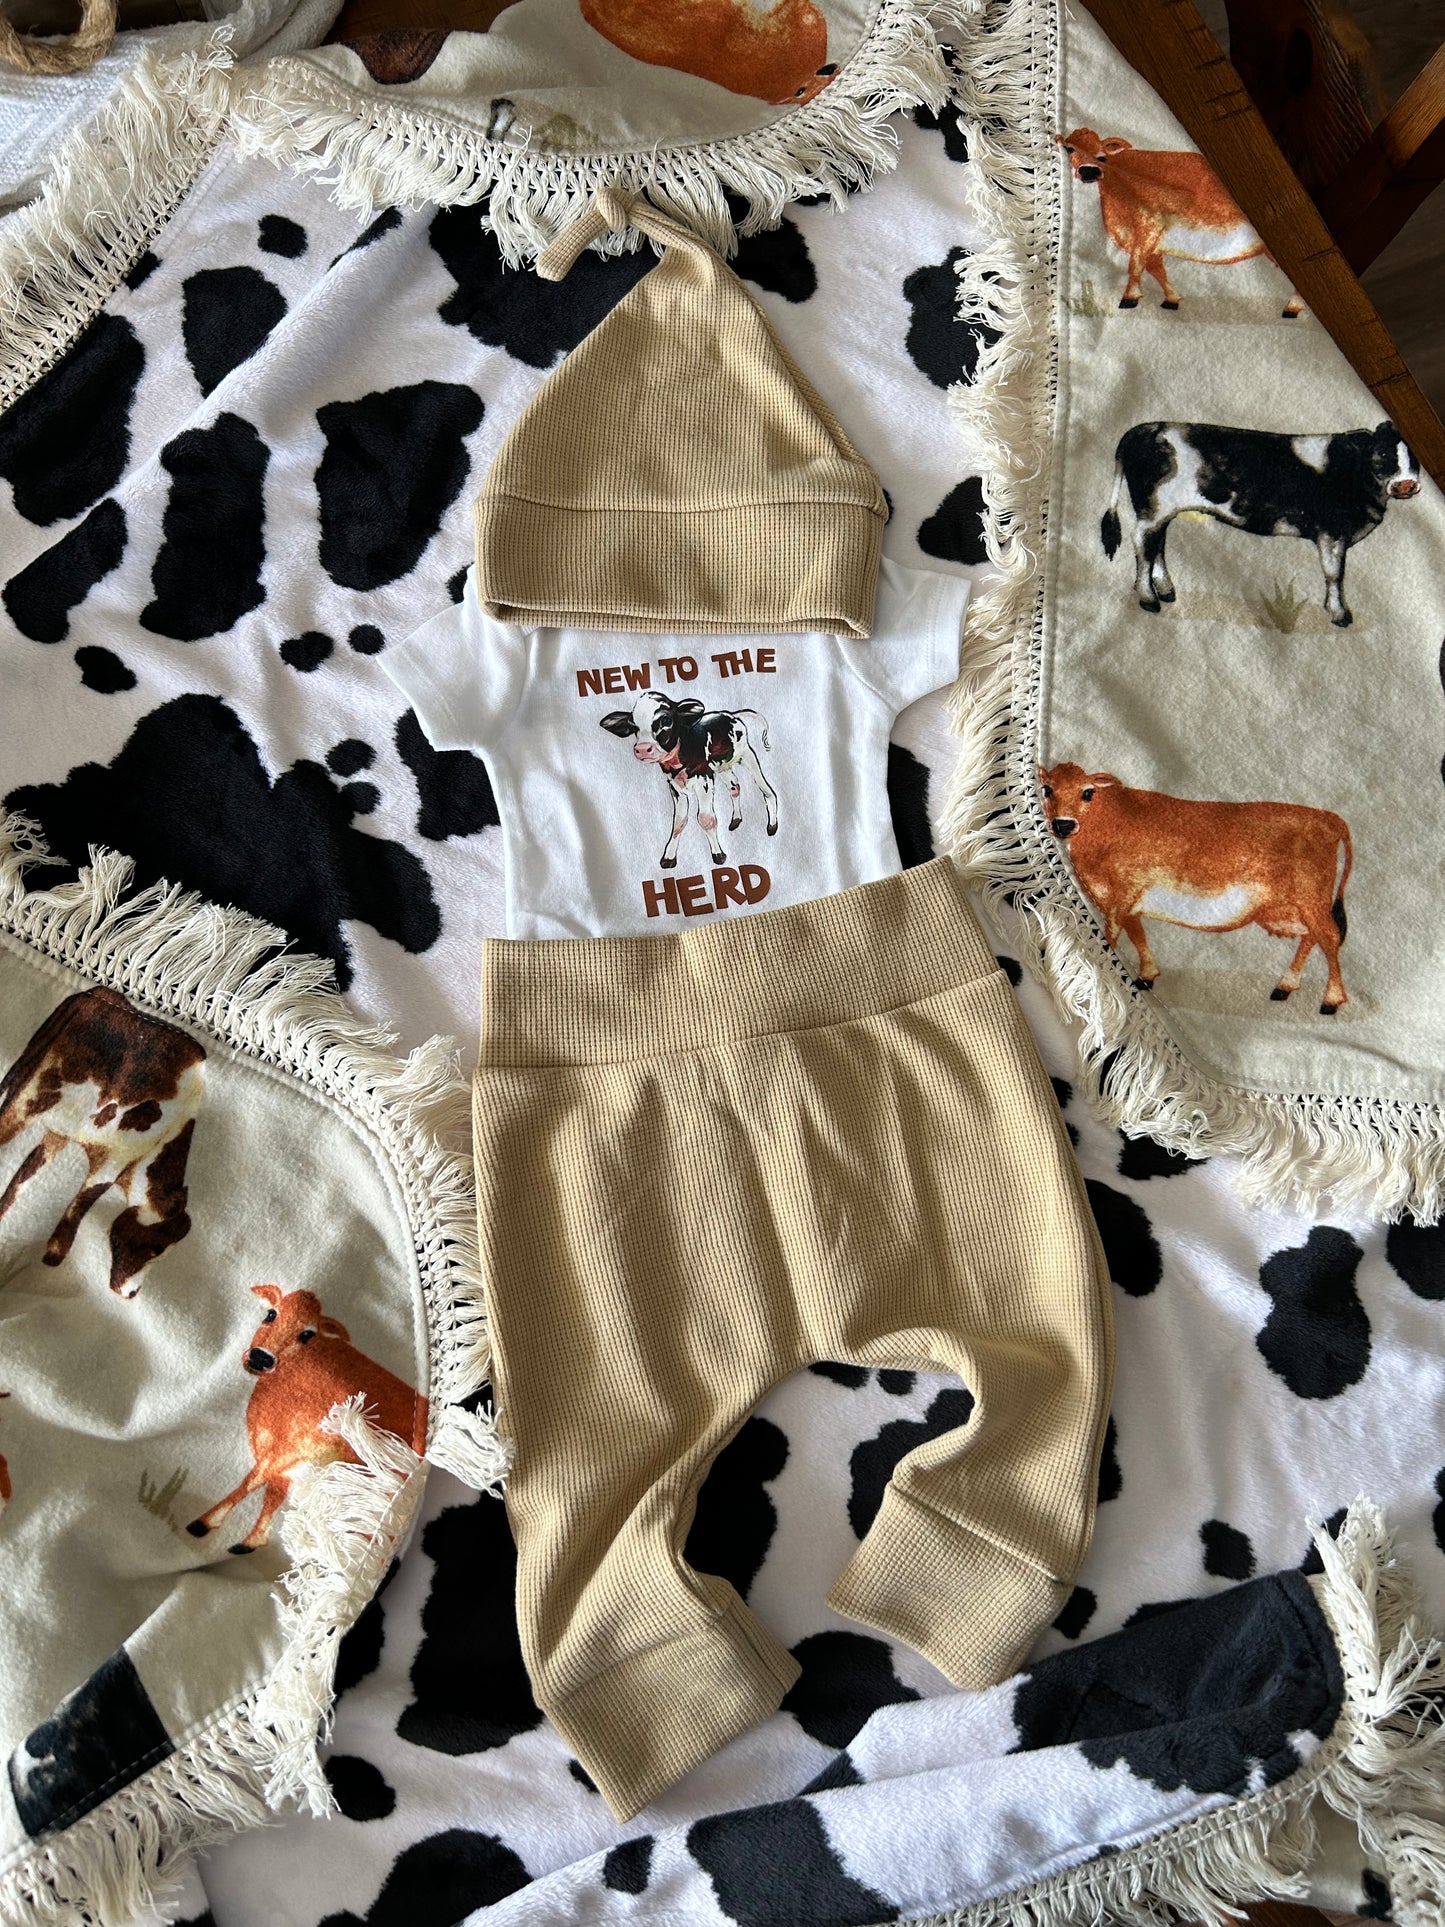 0-3 Month 4 Piece Newborn Blanket Layette Gift Set ‘New to the Herd’ Tan Cow Fringe